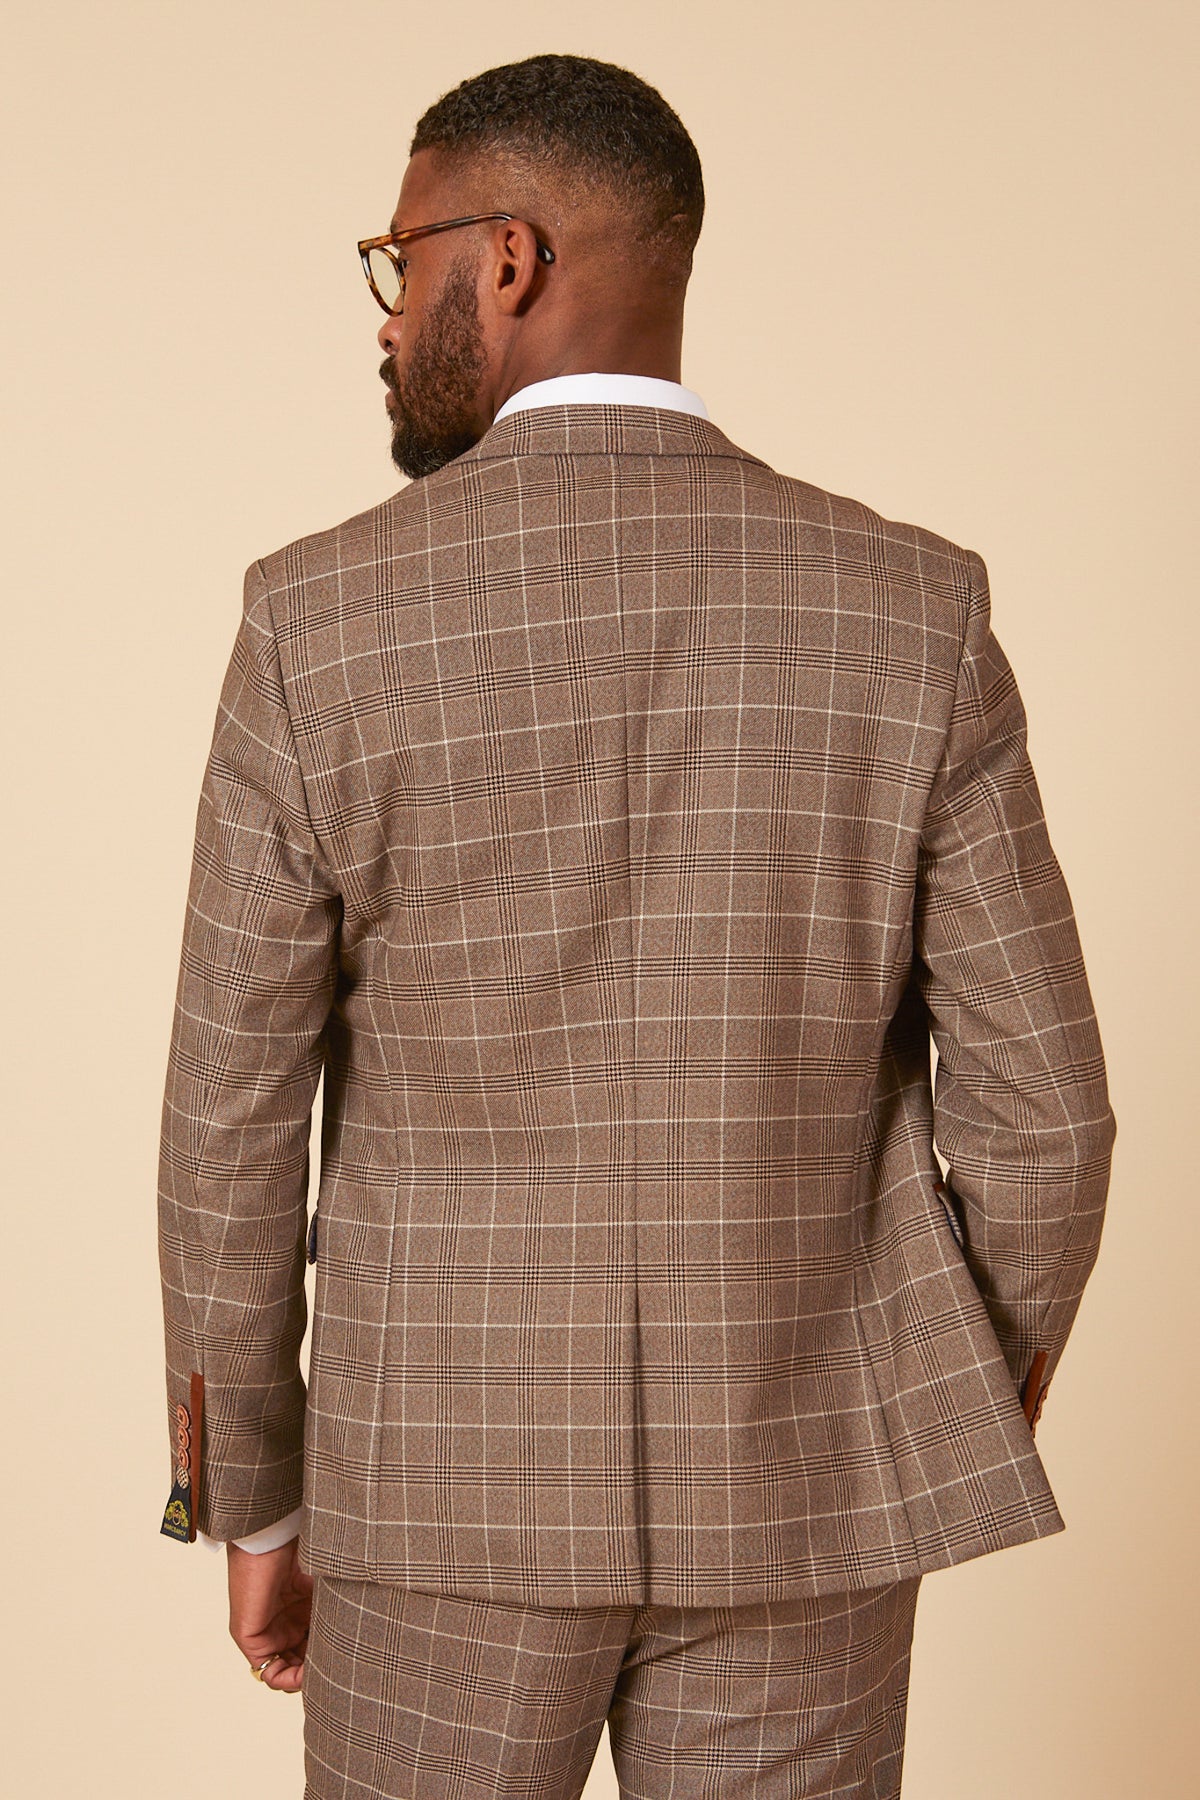 RAY - Tan Check Suit With Kelvin Tan Waistcoat – Marc Darcy